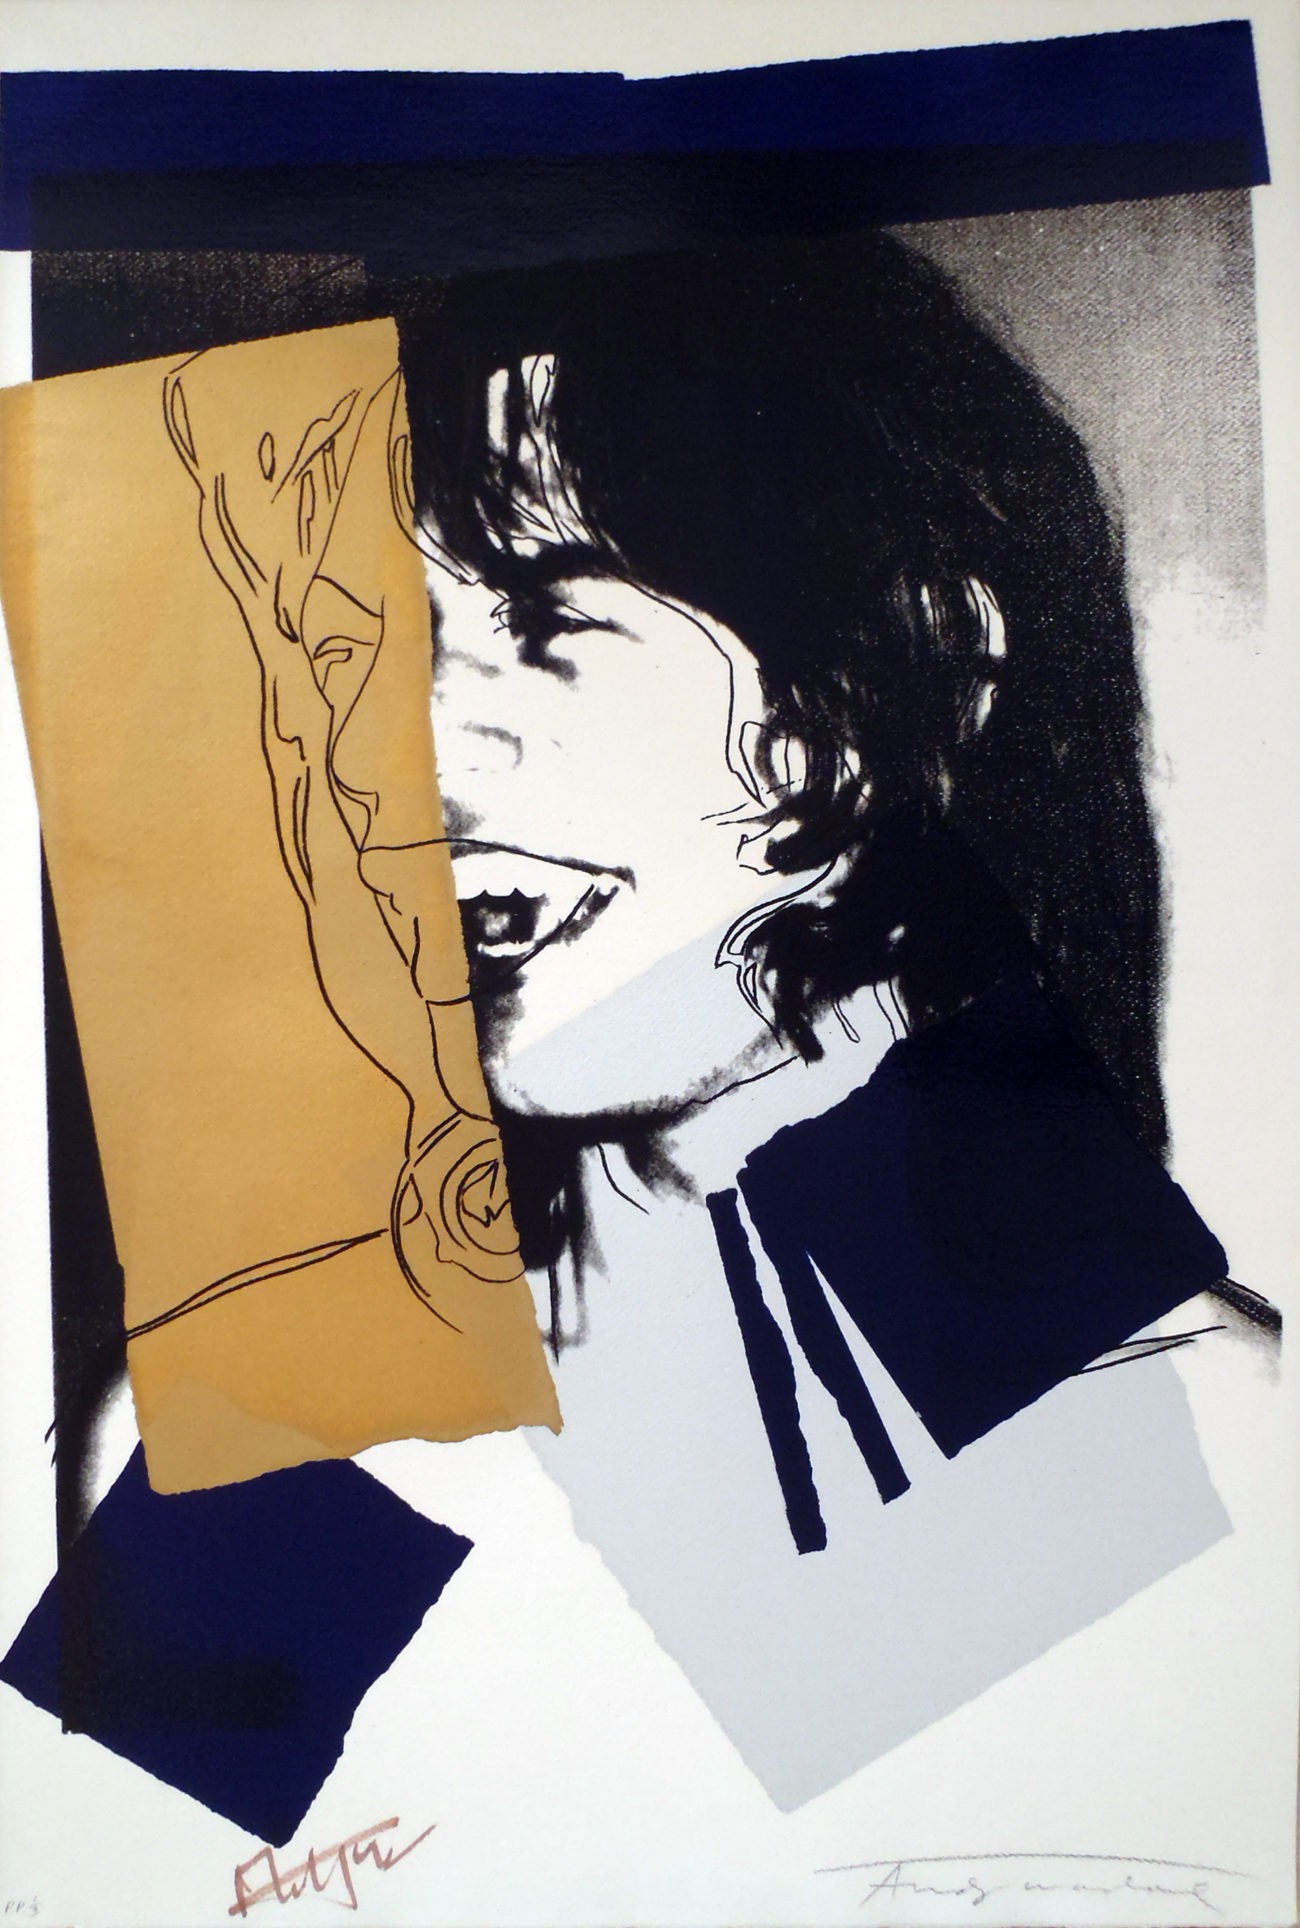 Andy Warhol | Mick Jagger 142 | 1975 | Image of Artists' work.